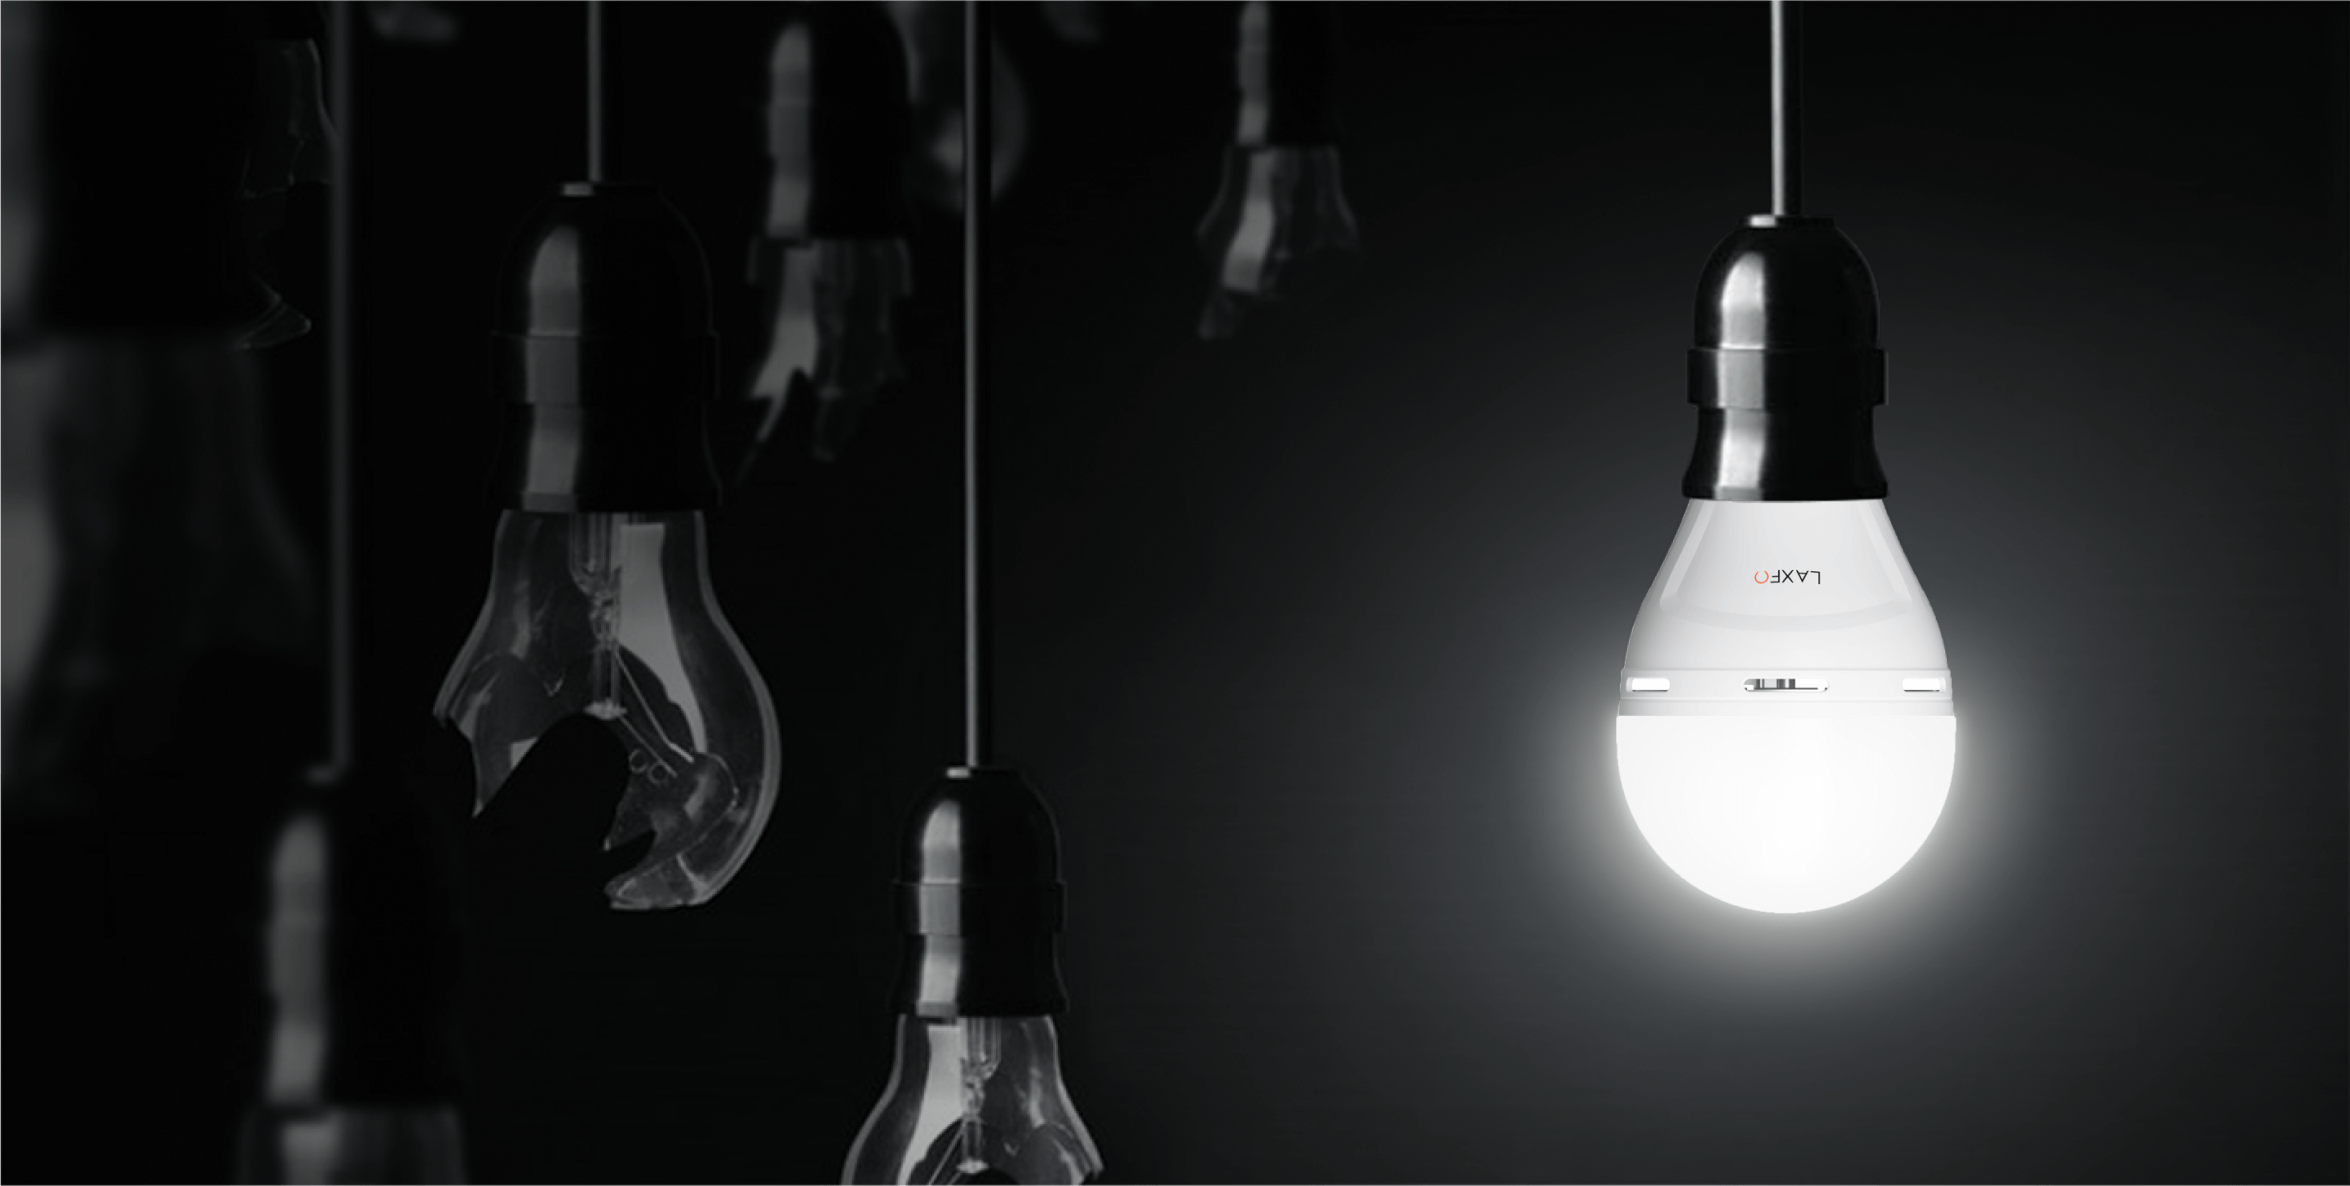 Navigating Light and Innovation Together - Explore the LAXFO Story